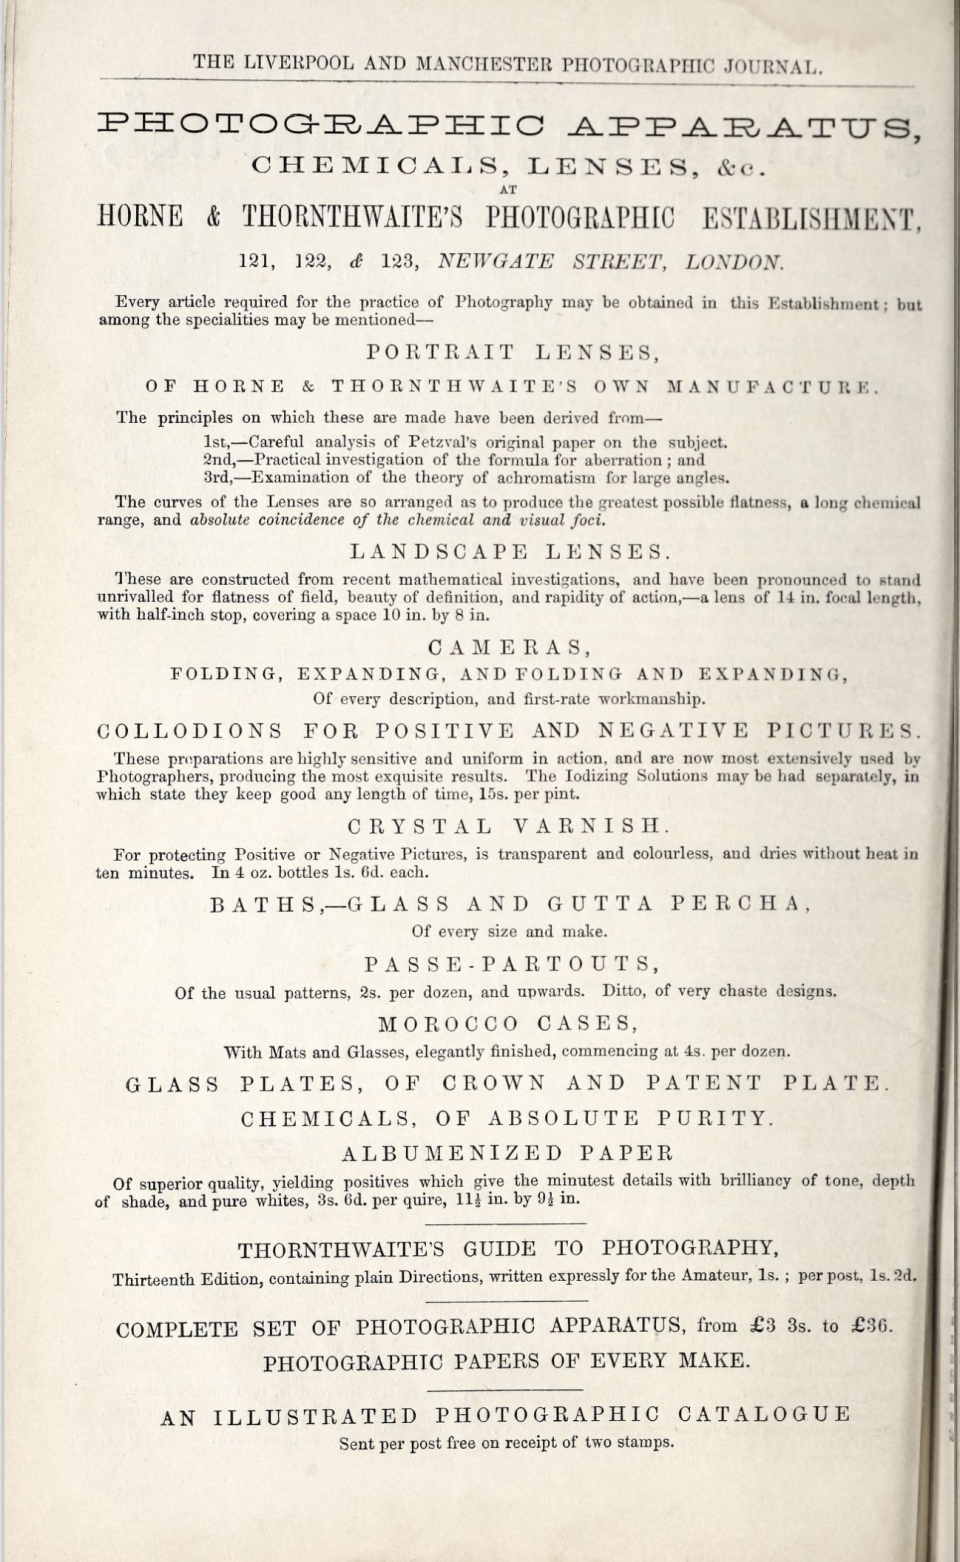 Print advertisement for Horne & Thornthwaite's Photographic Establishment, found in the 1857 edition of The Liverpool and Manchester Photographic Journal